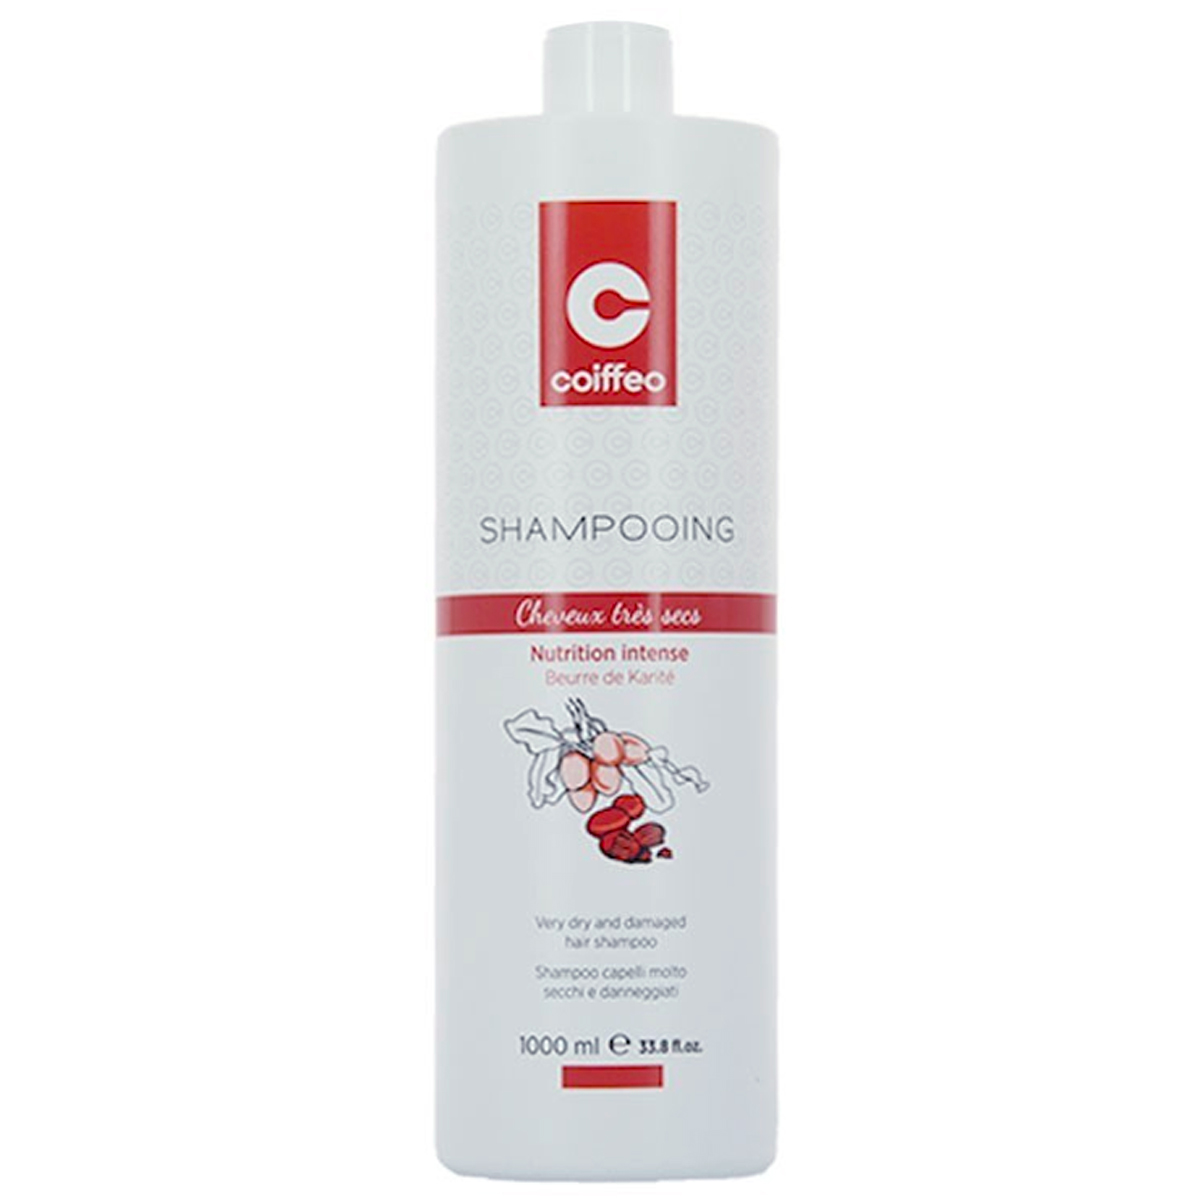 Shampoing Coiffeo Cheveux Trs Secs 1 Litre